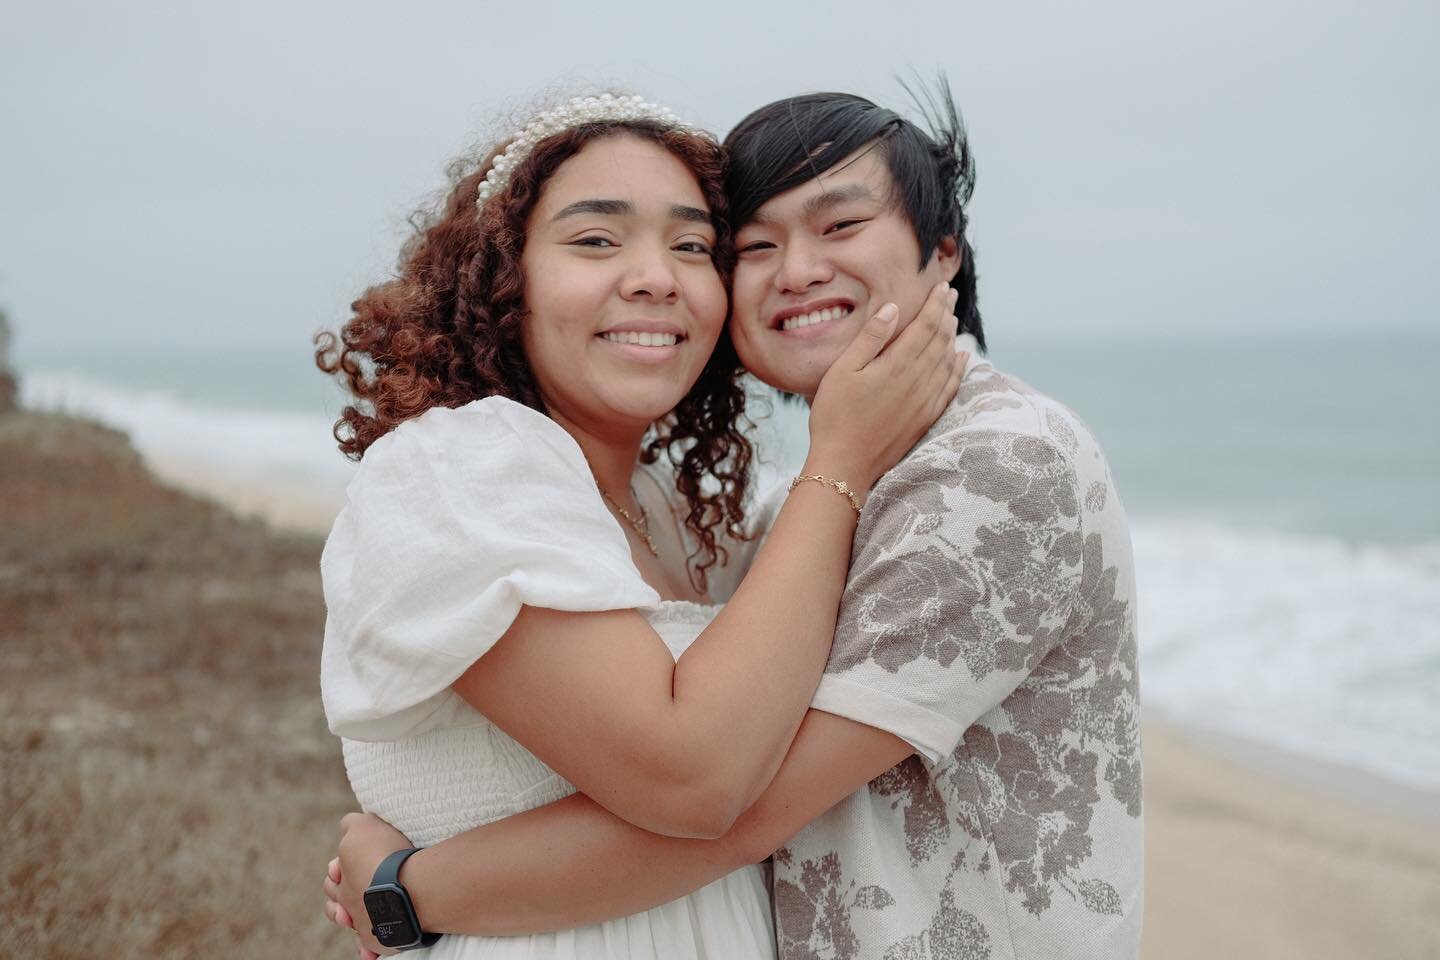 Just found out that these two are engaged!!🥹Congratulations y&rsquo;all, I&rsquo;m very happy for you
.
.
.
#halfmoonbayphotographer #sanfranciscobayareaphotographer #sanfranciscoweddingphotographer #sfweddingphotographer #bayareaweddingphotographer